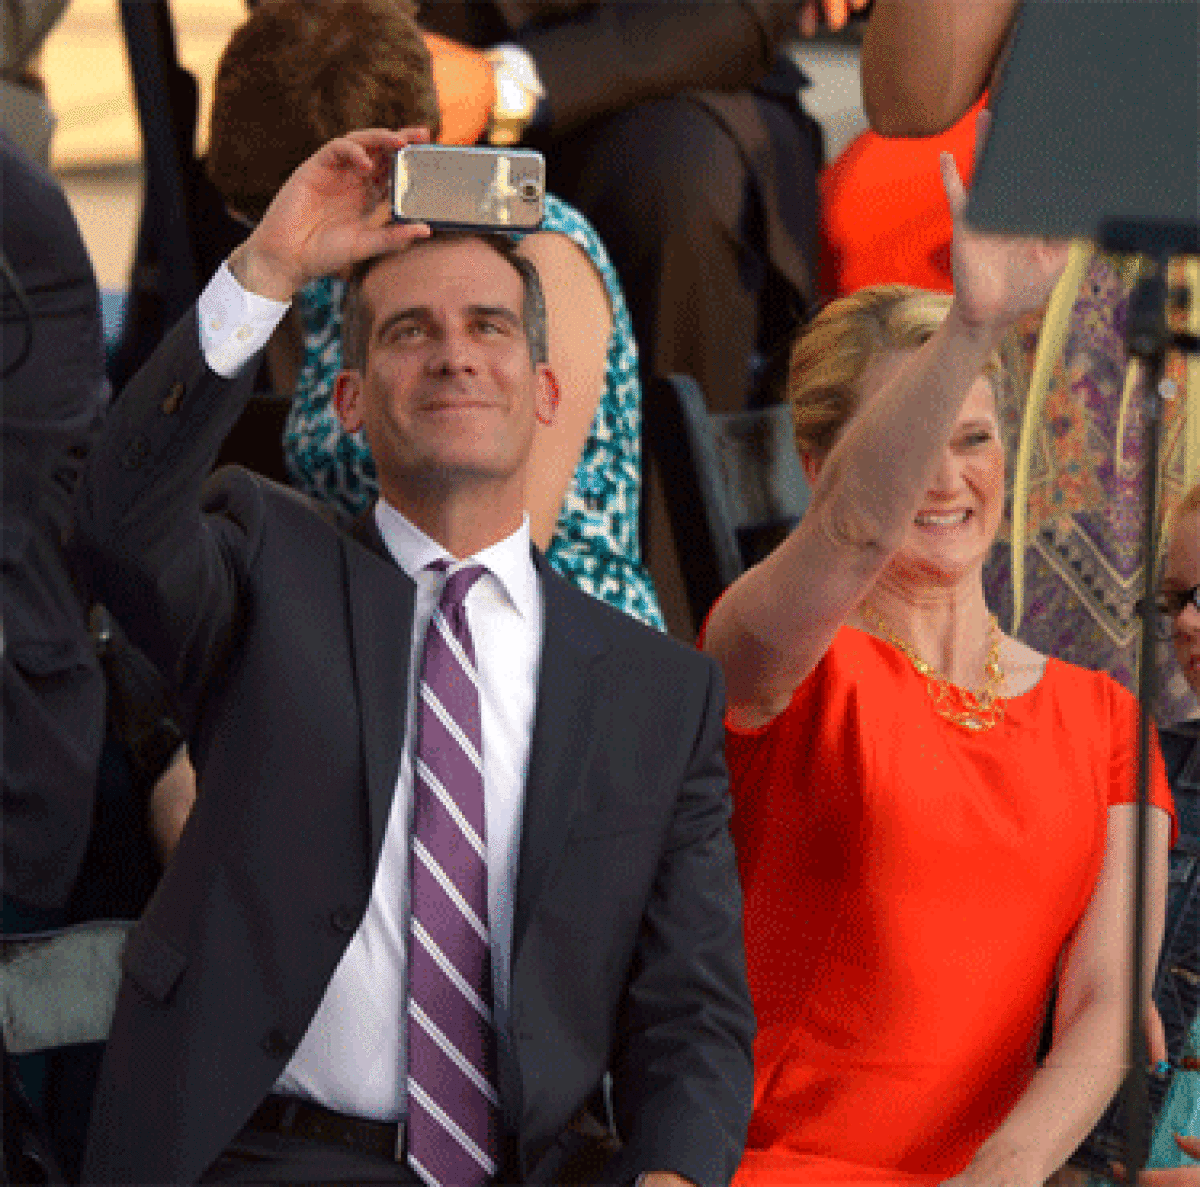 Mayor Eric Garcetti, who promises to carry Los Angeles into the "smartphone era," takes a photo of the crowd at his inauguration while his wife Amy Wakeland acknowledges supporters.